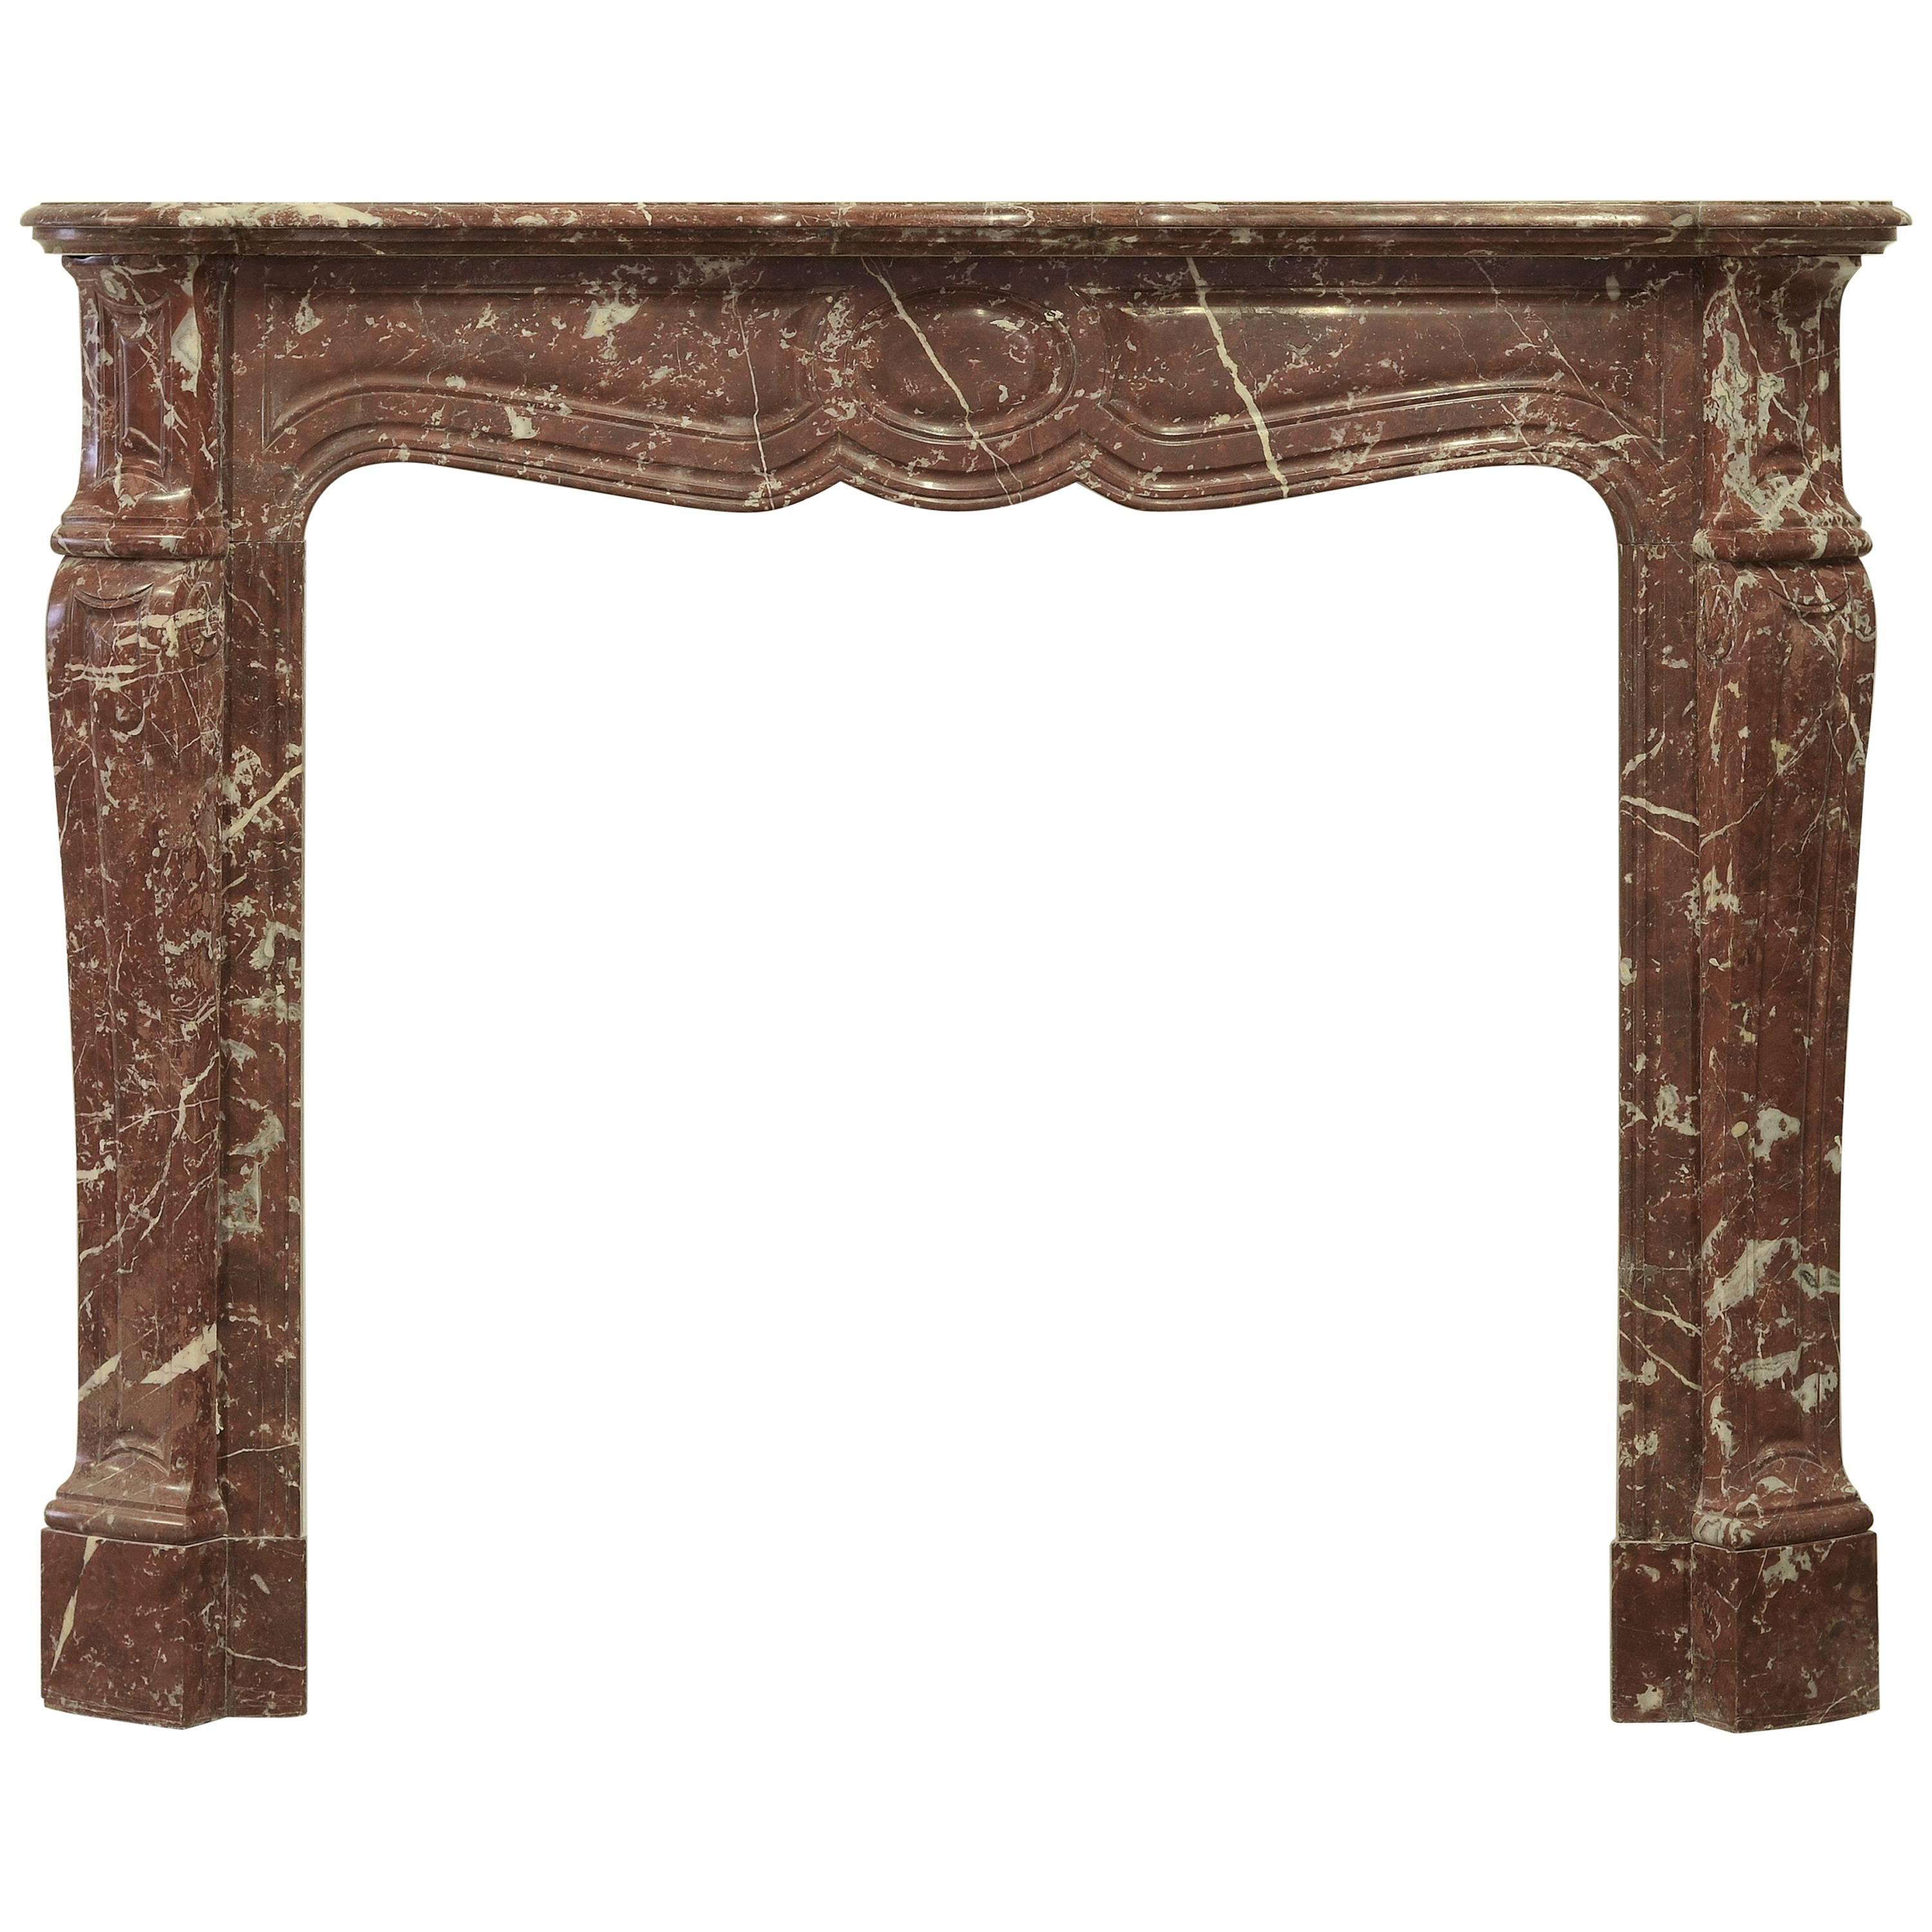 Antique Parisian Red Marble Fireplace Mantel